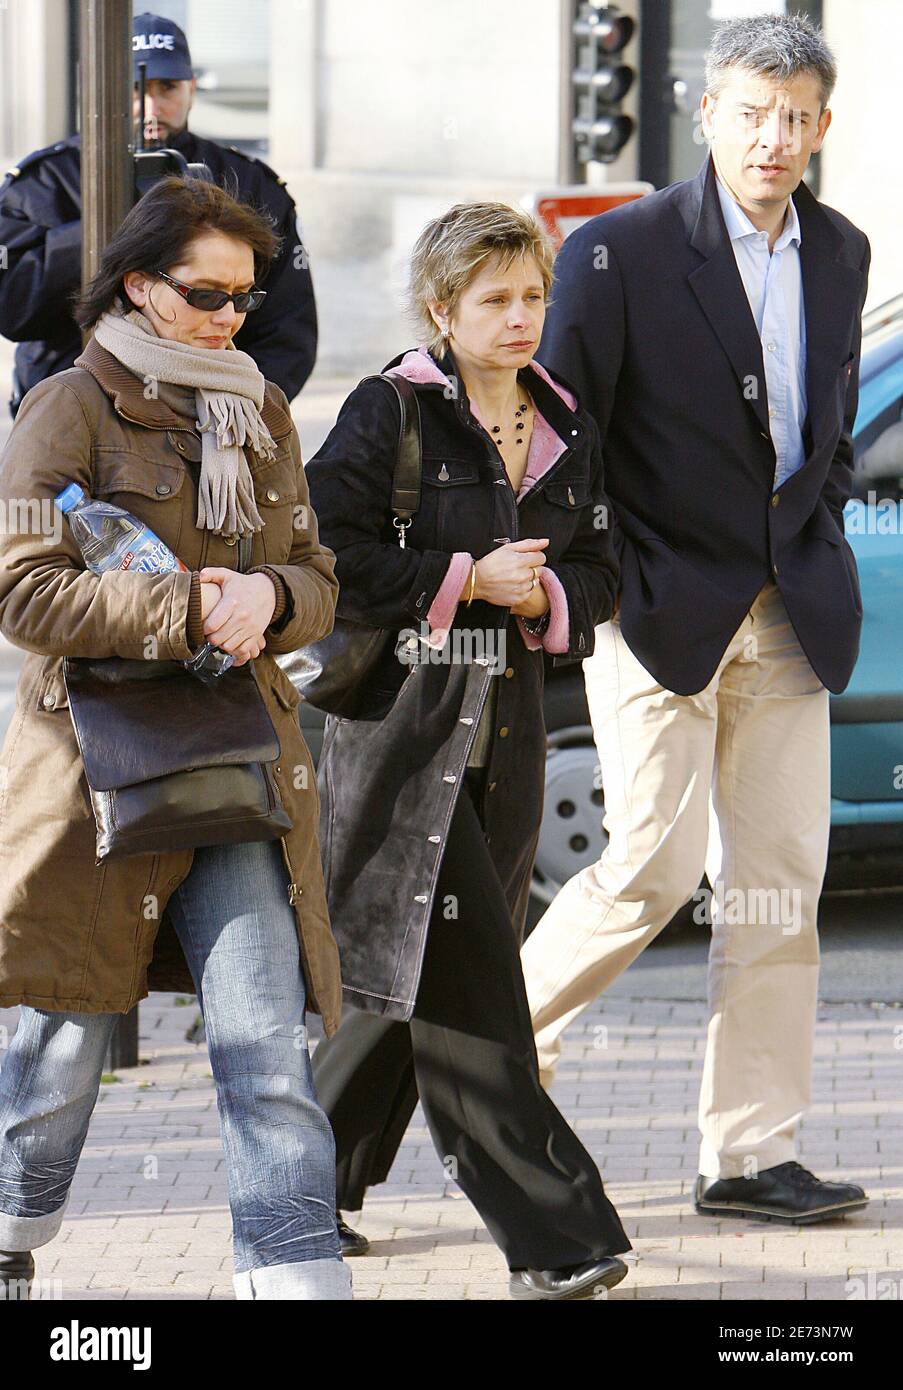 EXCLUSIVE. Nurse Chantal Chanel arrives with her husband at Perigueux  court, South west of France on March 13, 2007. Chantal Chanel and Doctor  Laurence Tramois are accused of euthanesia, done on a